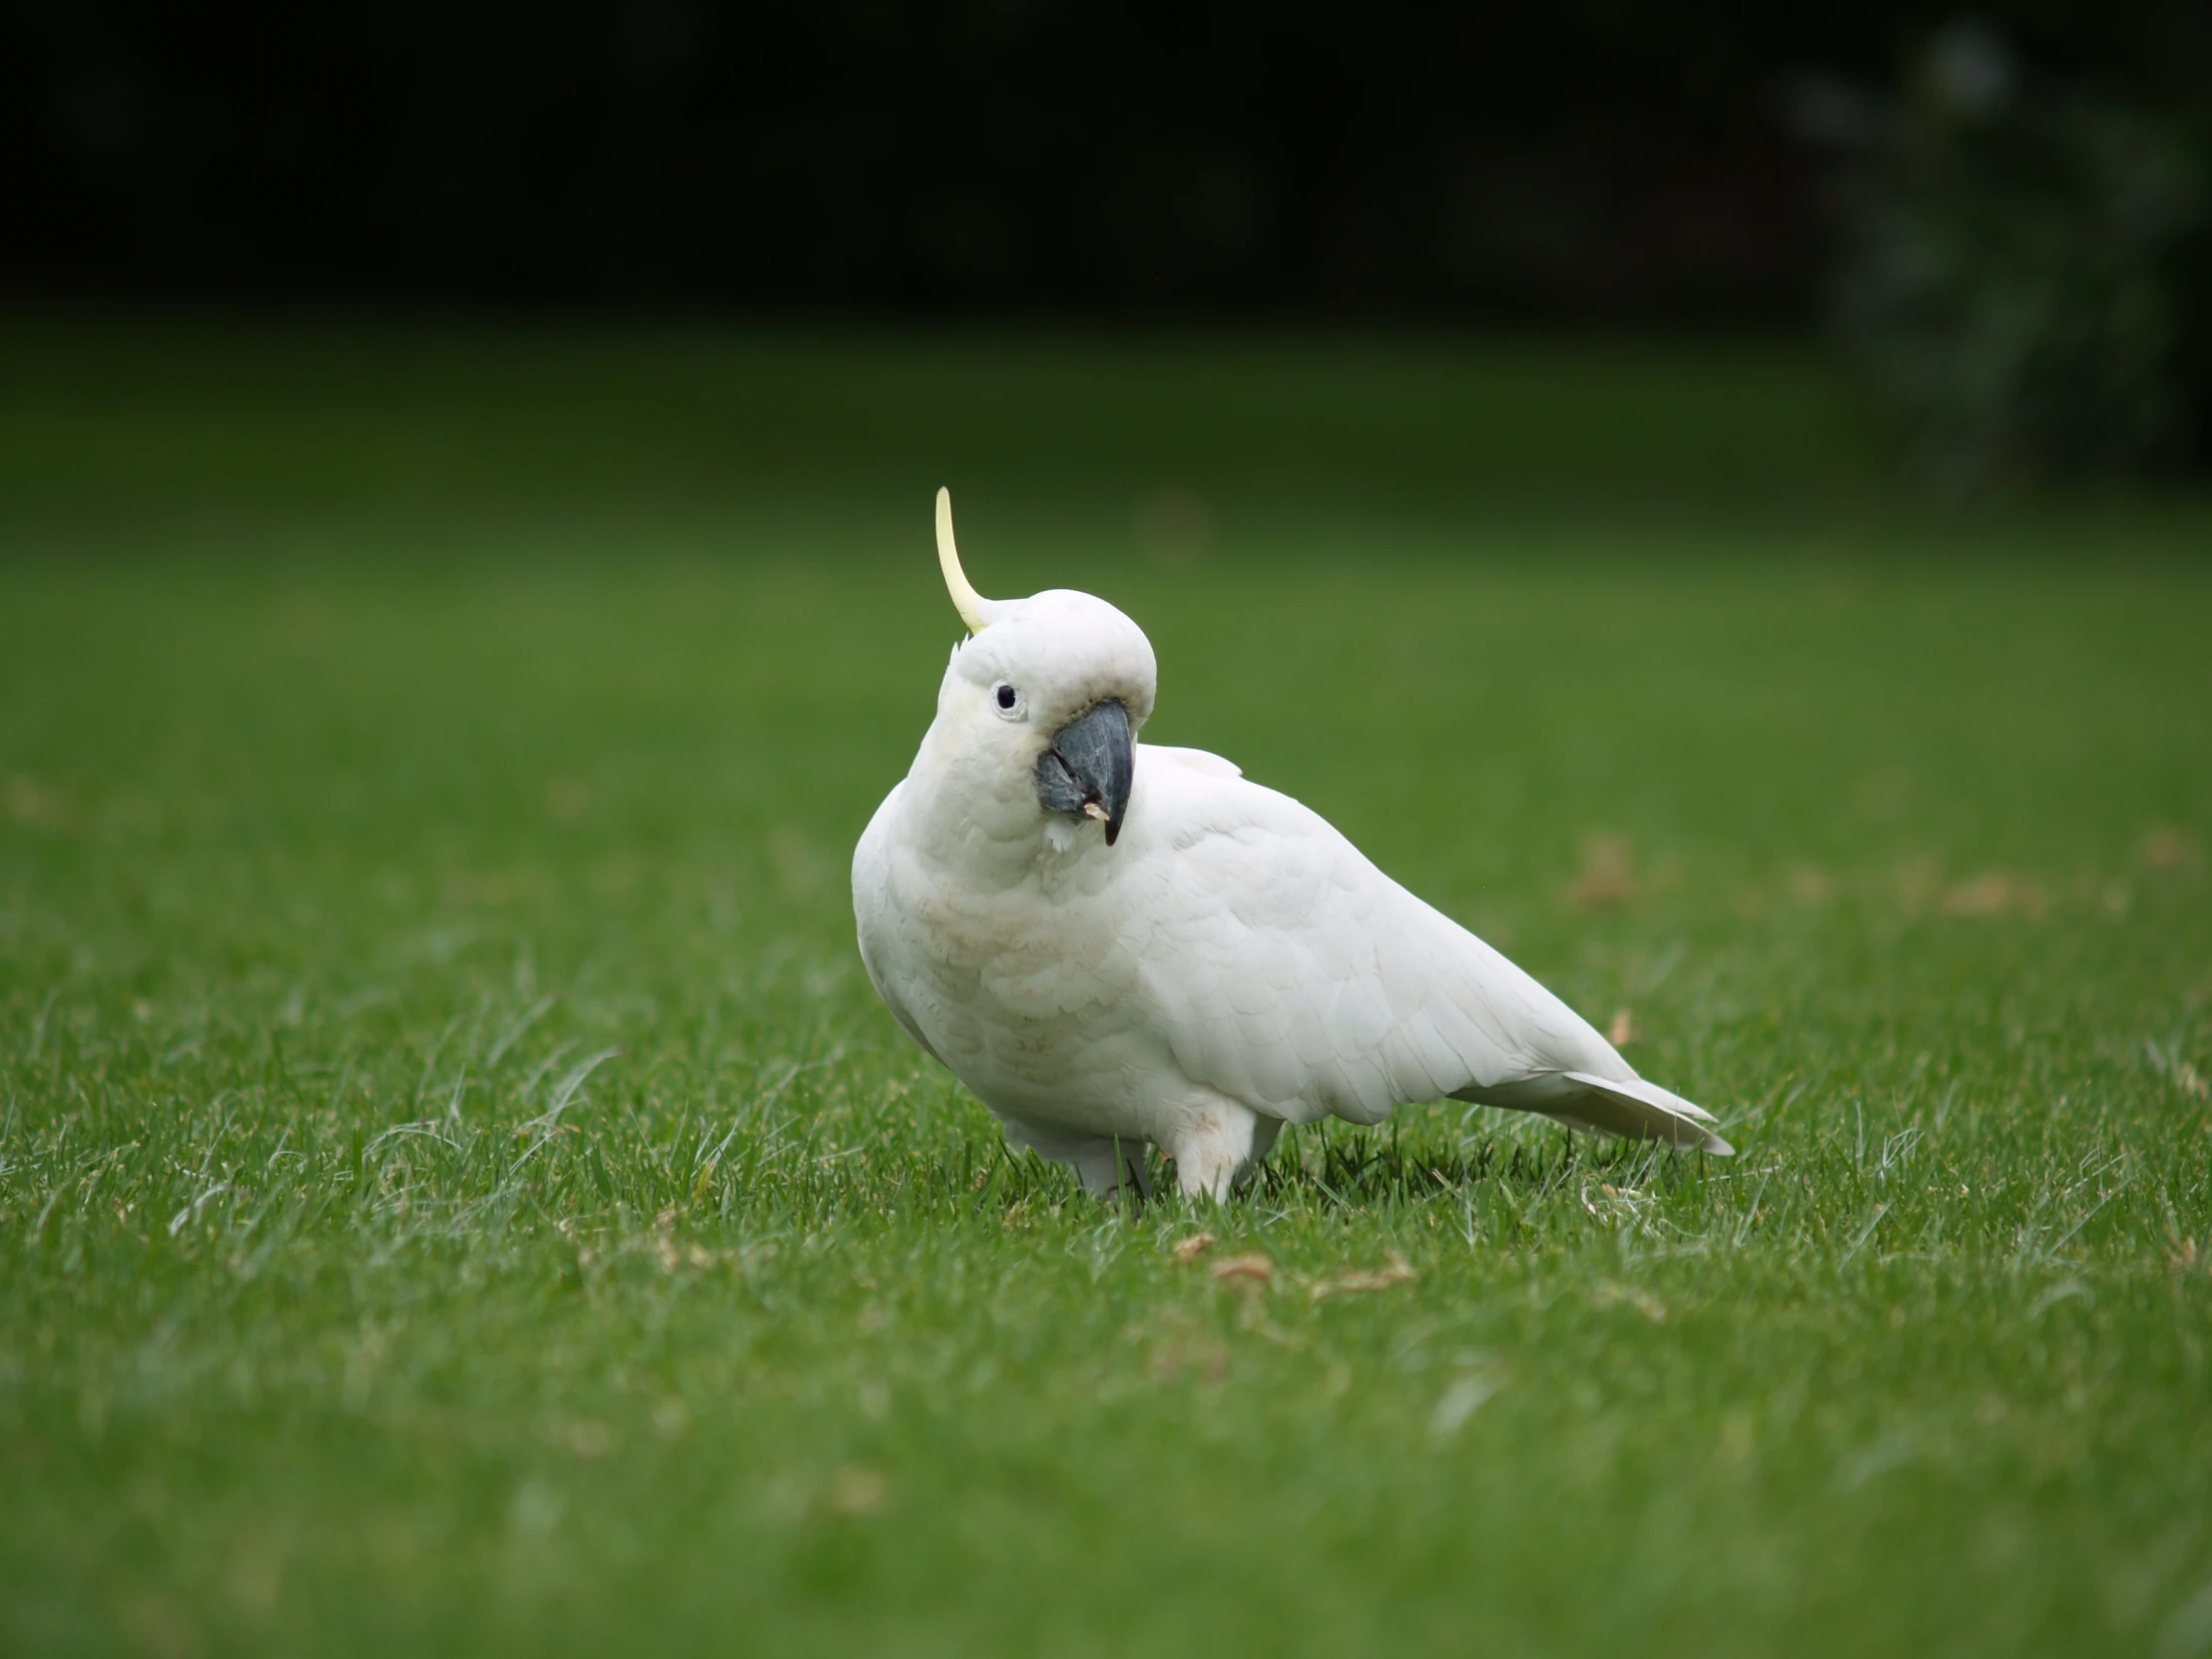 a white bird stands on the grass